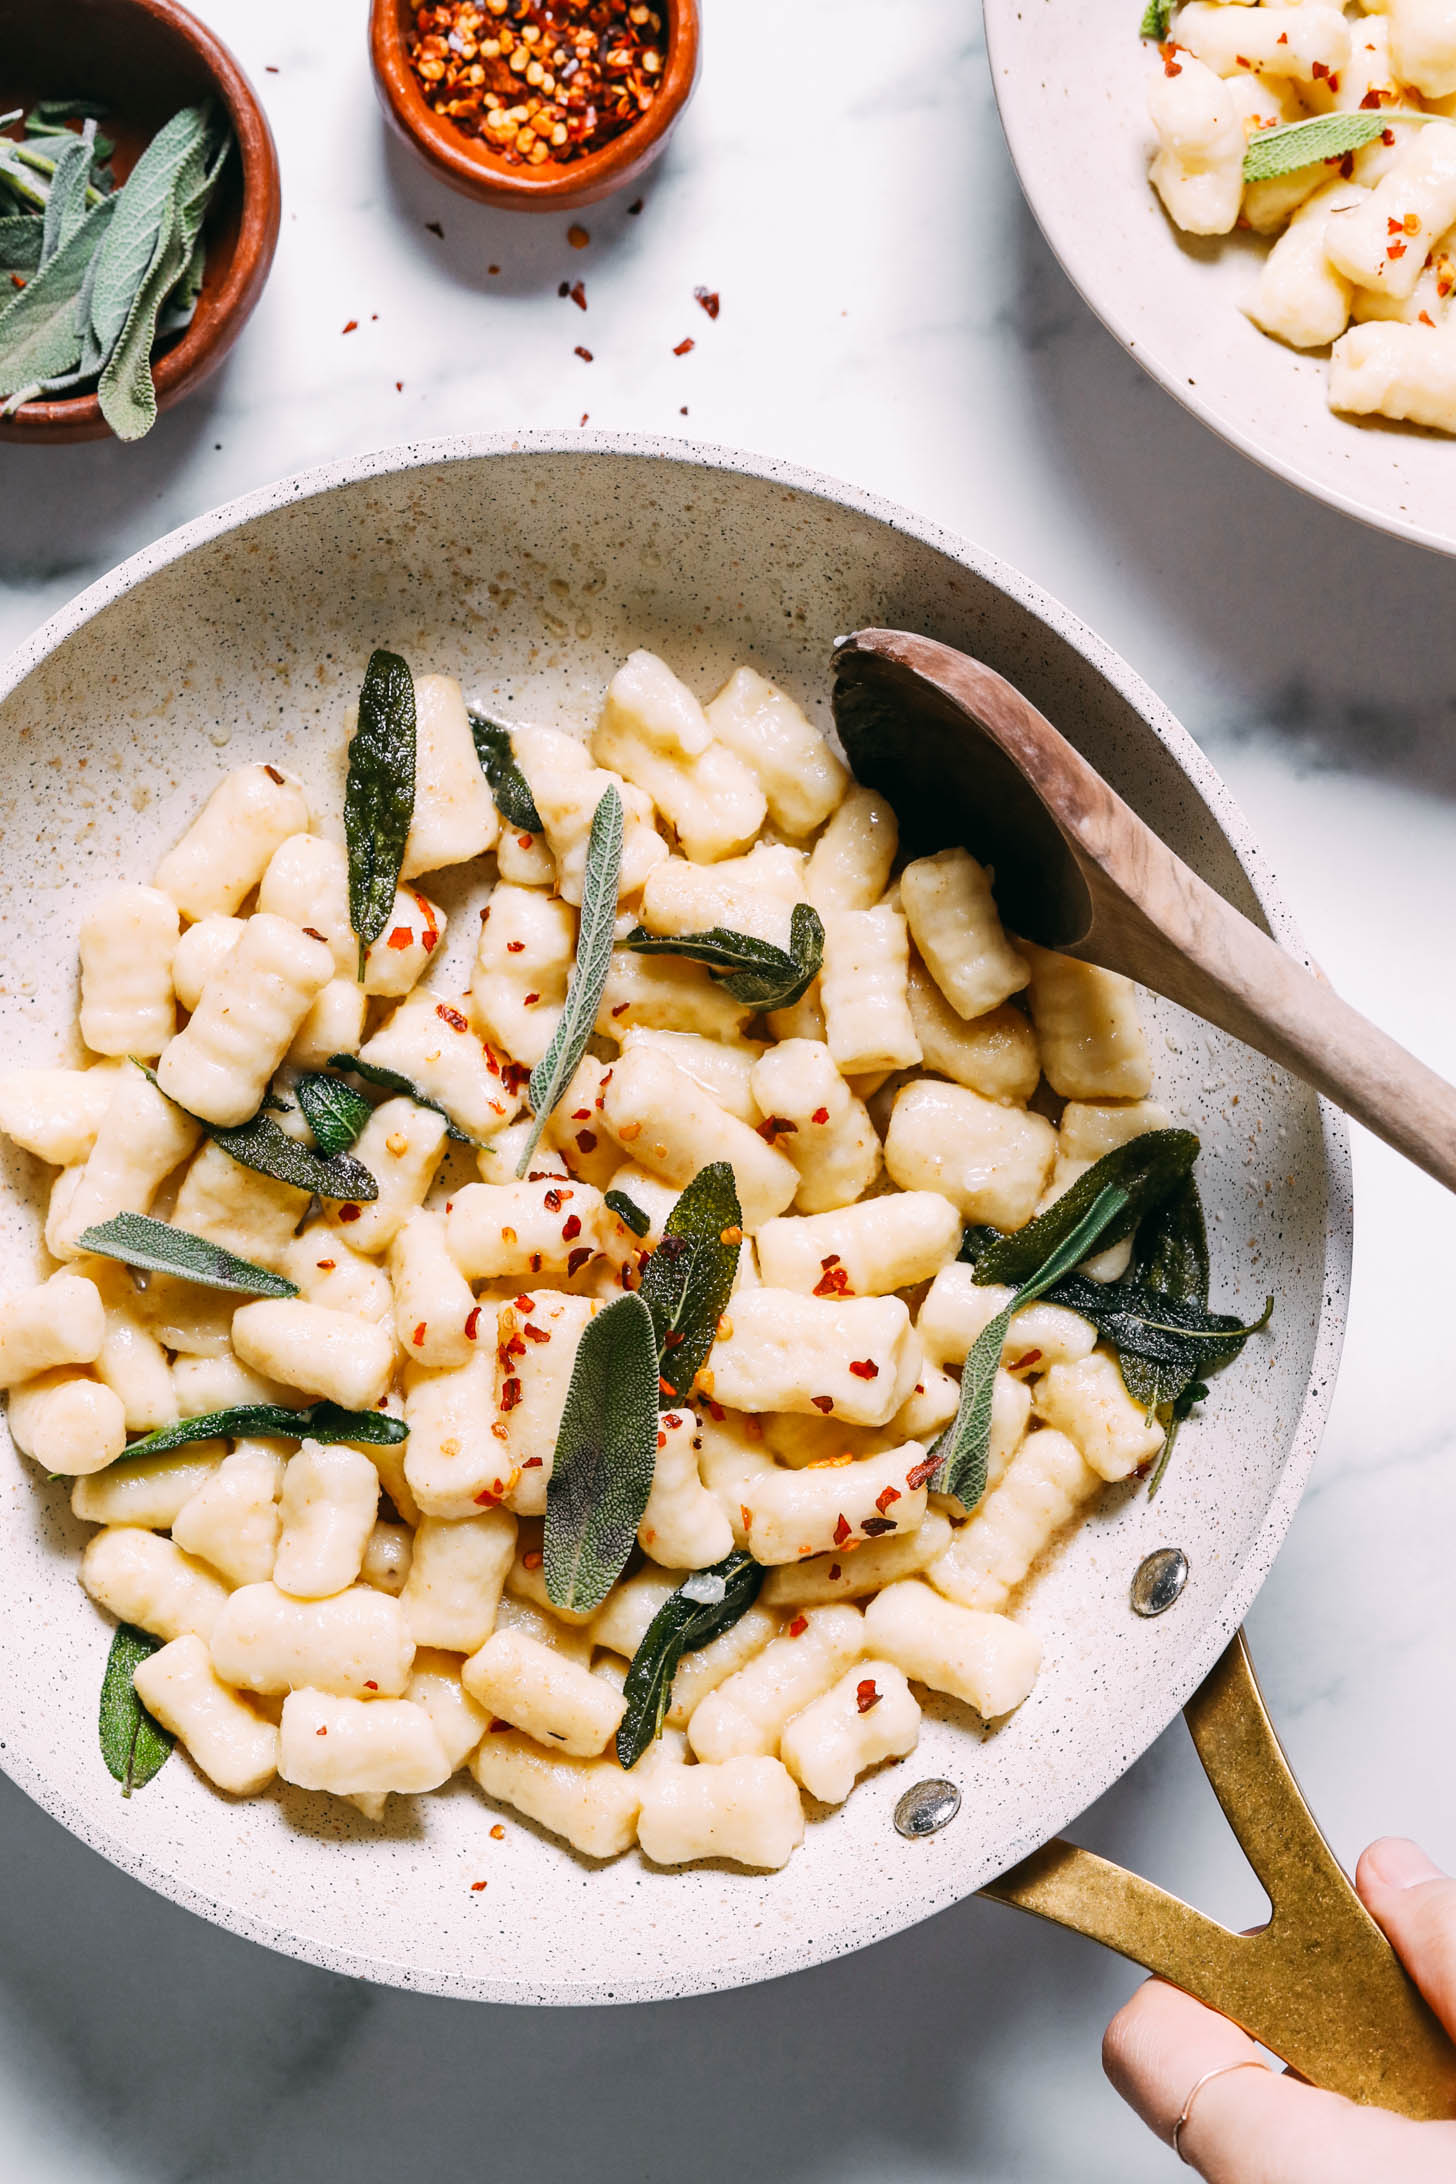 Skillet of gluten-free gnocchi with red pepper flakes and sage